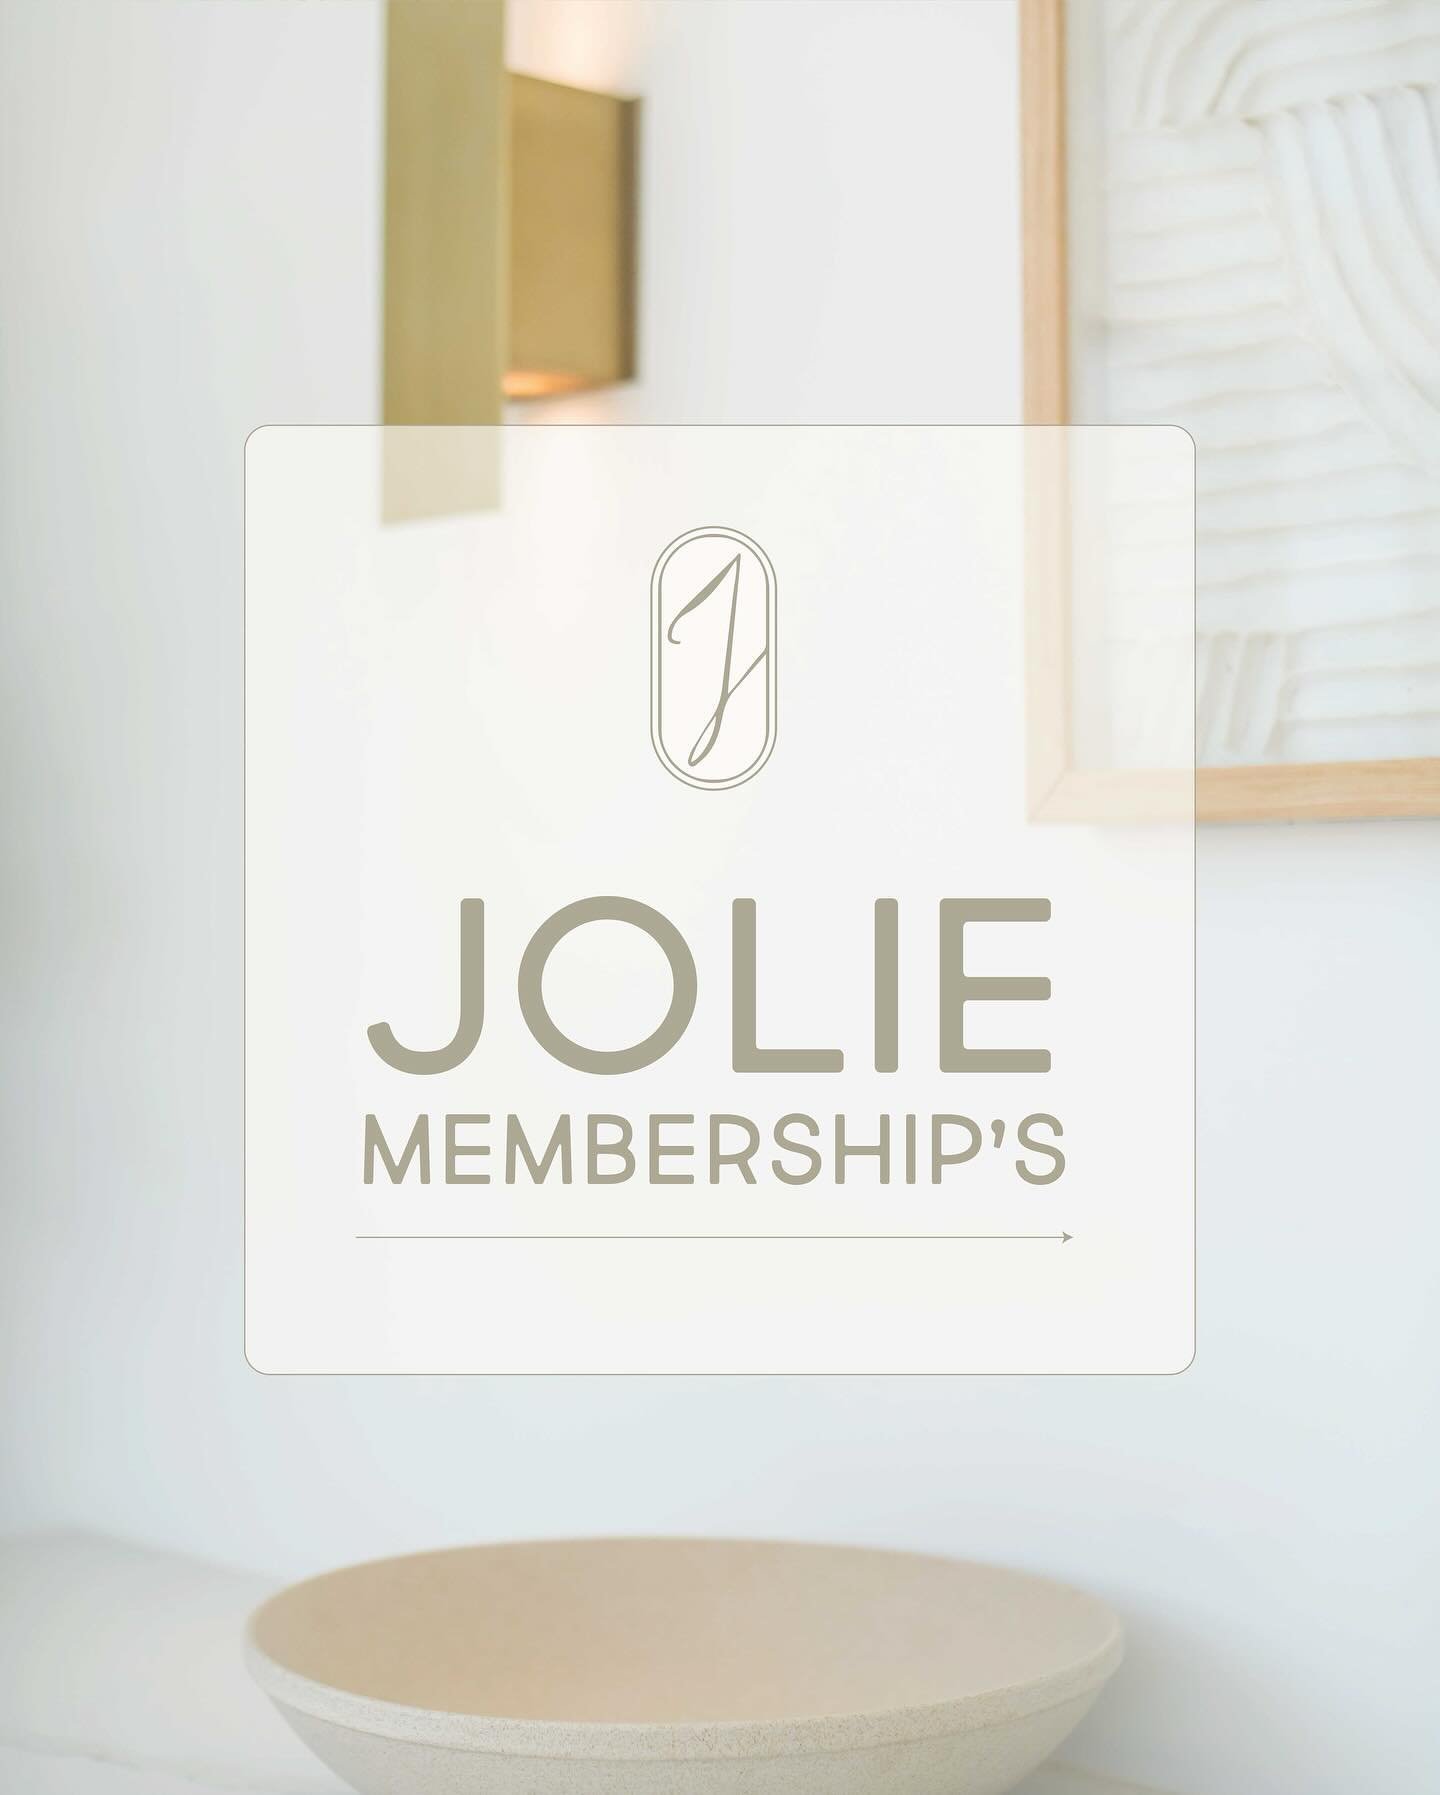 ✨EXCITING UPDATES FOR JOLIE MEMBERS! ✨

Introducing new services added to our Flex Membership starting today, May 1st! Visit our website for more details on our revamps at Joliemedispa.com

Updates to the Flex Membership:
&bull; Added BBL Hero treatm